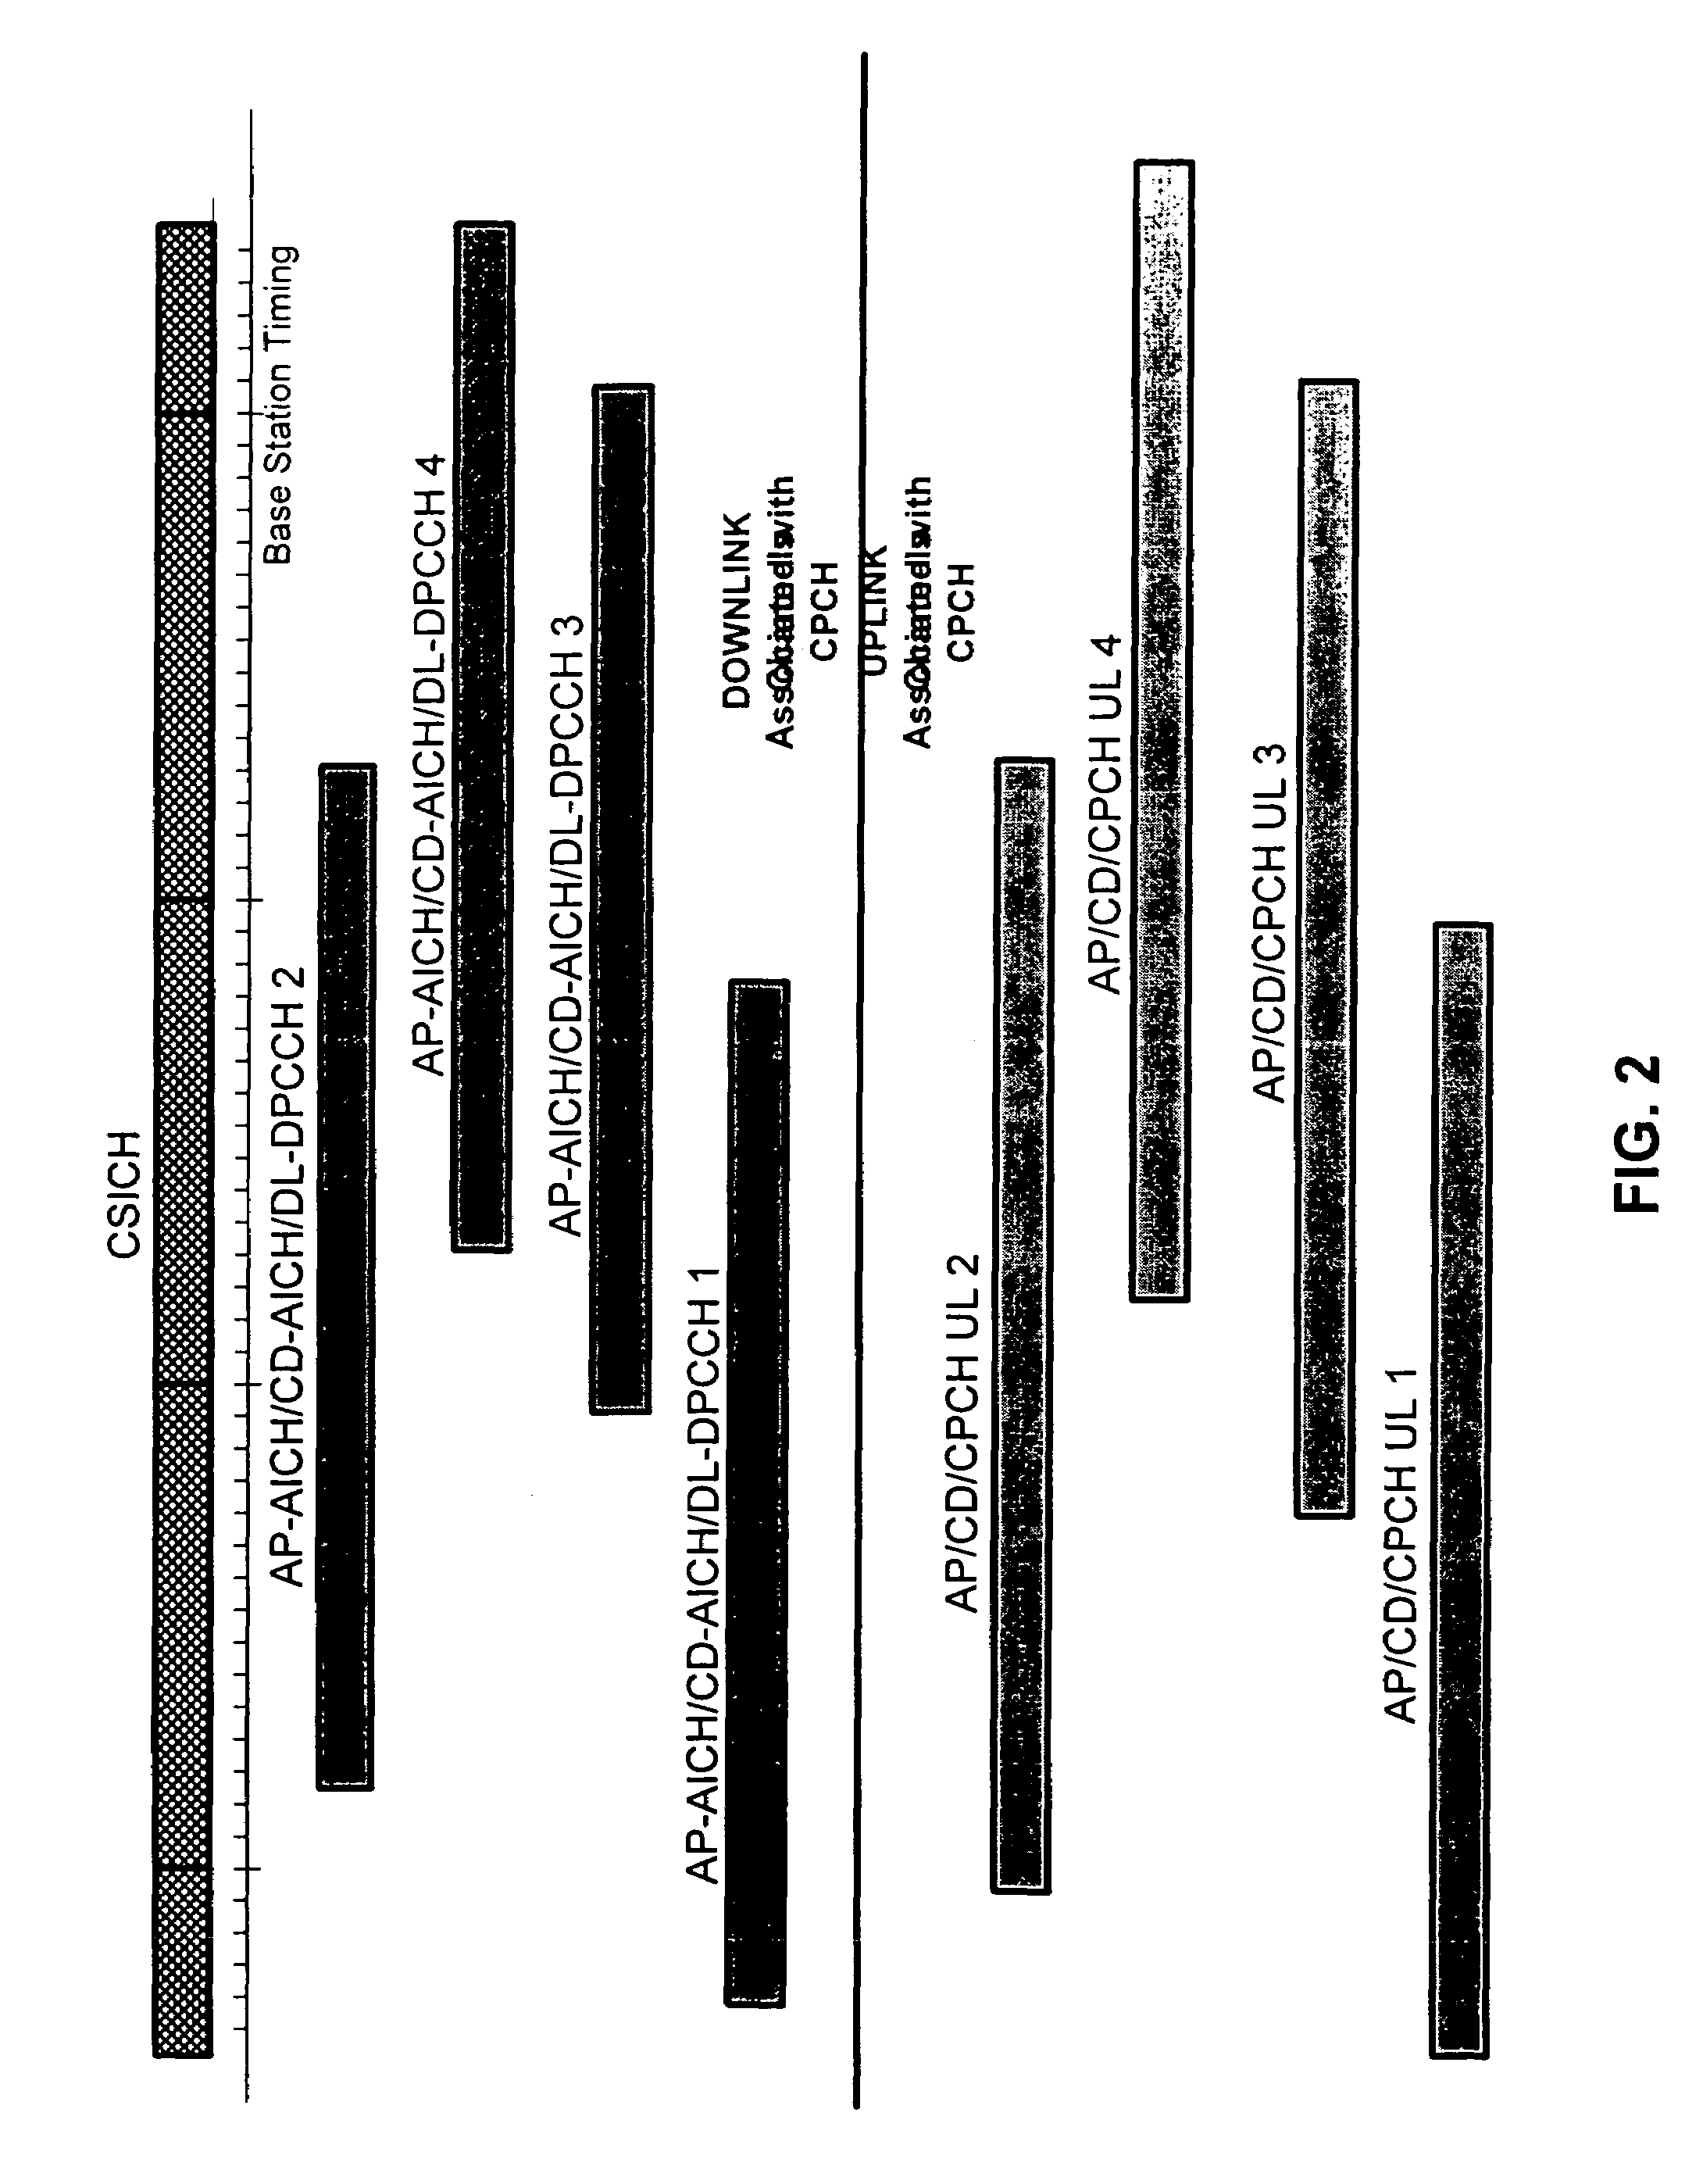 Hybrid DSMA/CDMA (digital sense multiple access/code division multiple access) method with collision resolution for packet communications